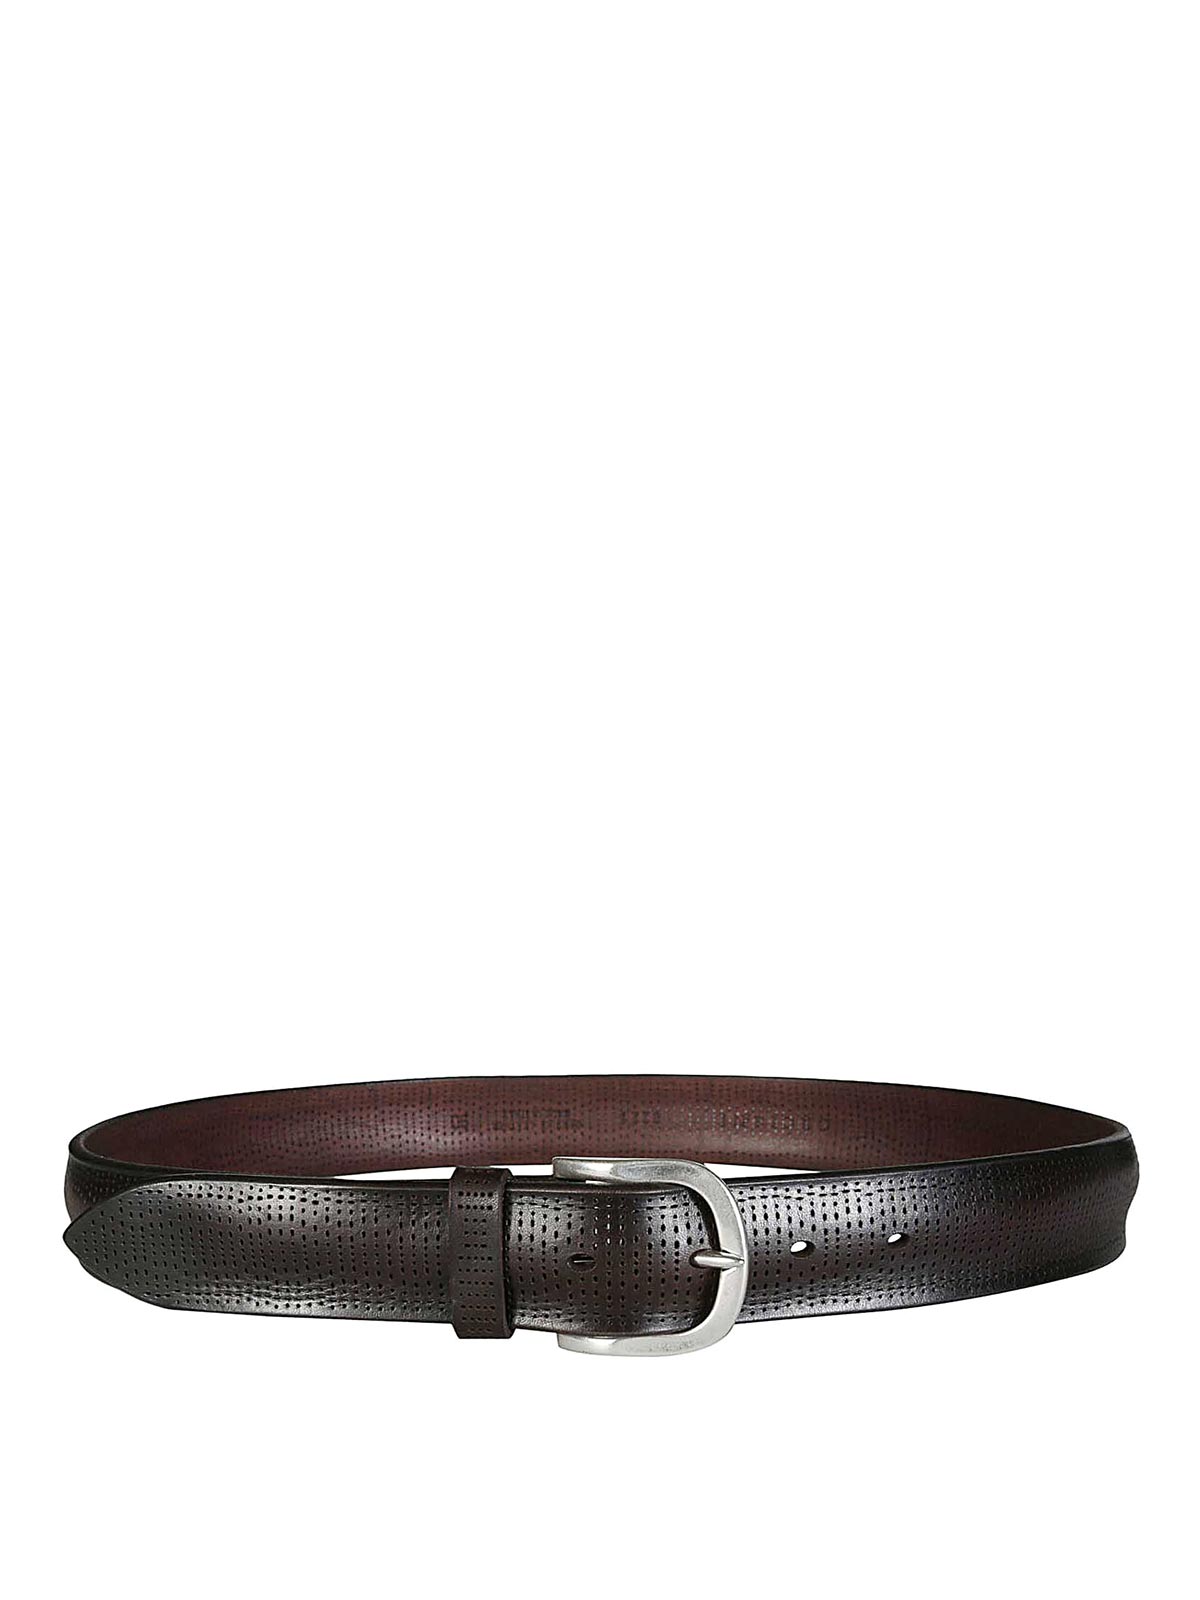 Shop Orciani Perforated Belt H35 In Marrón Oscuro